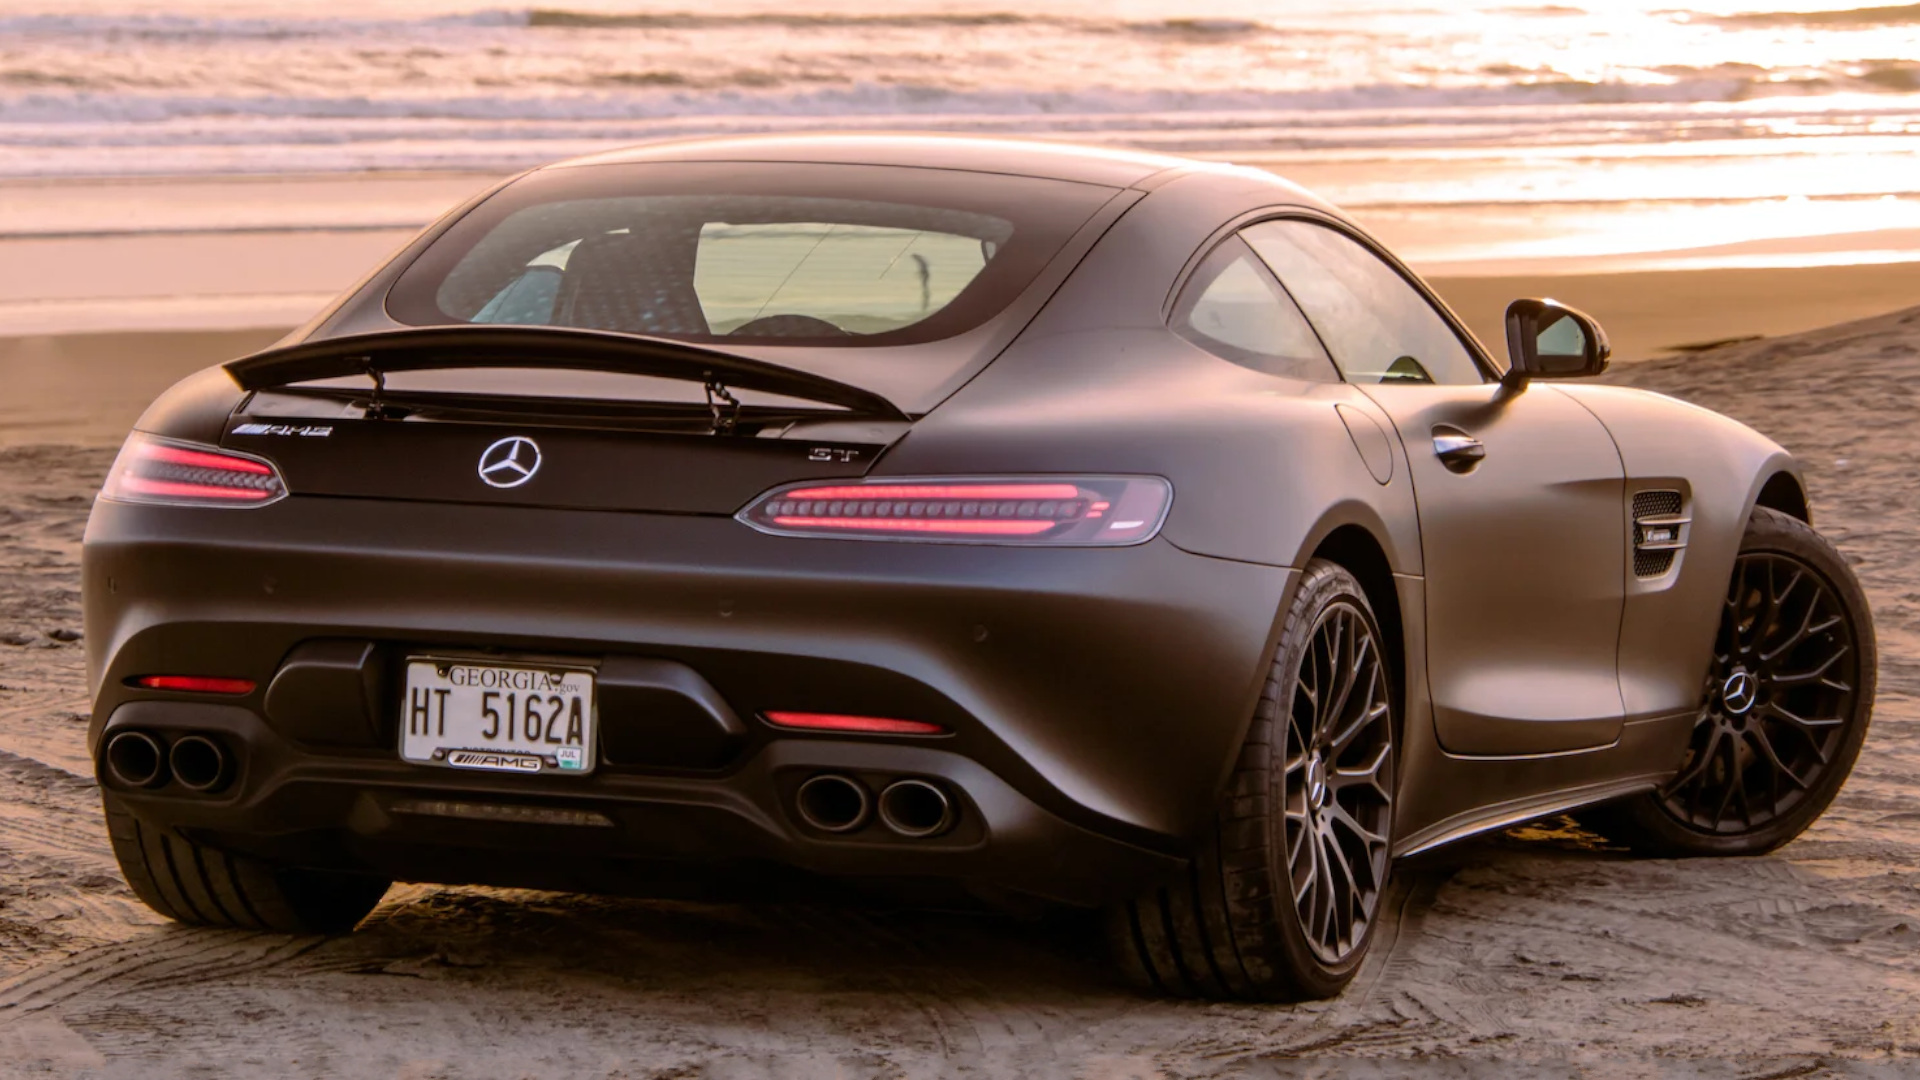 Production Ends For The Mercedes Amg Gt But A New One Is Coming 